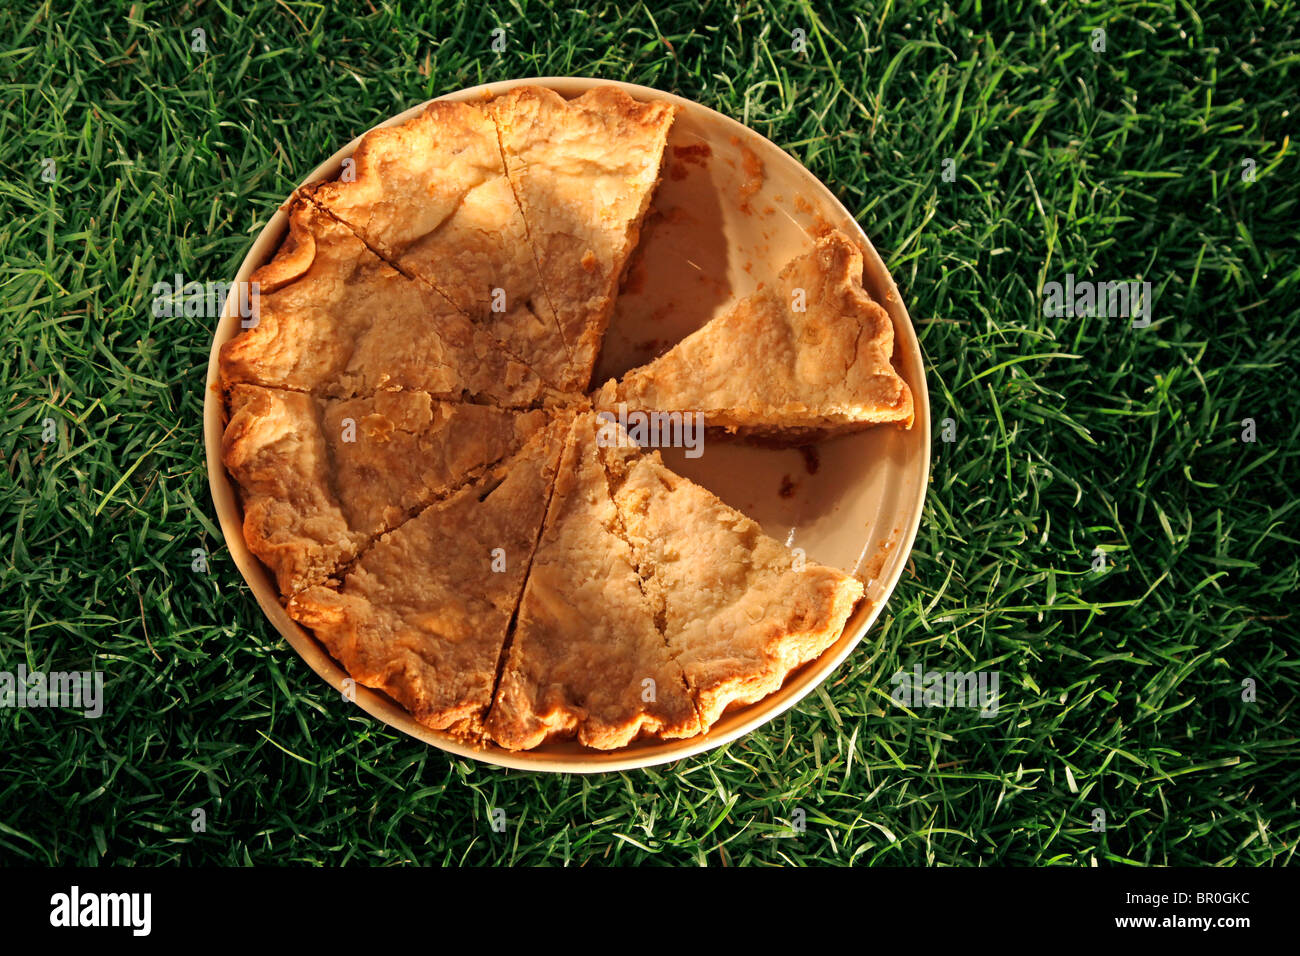 Apple pie from above with two slices missing Stock Photo